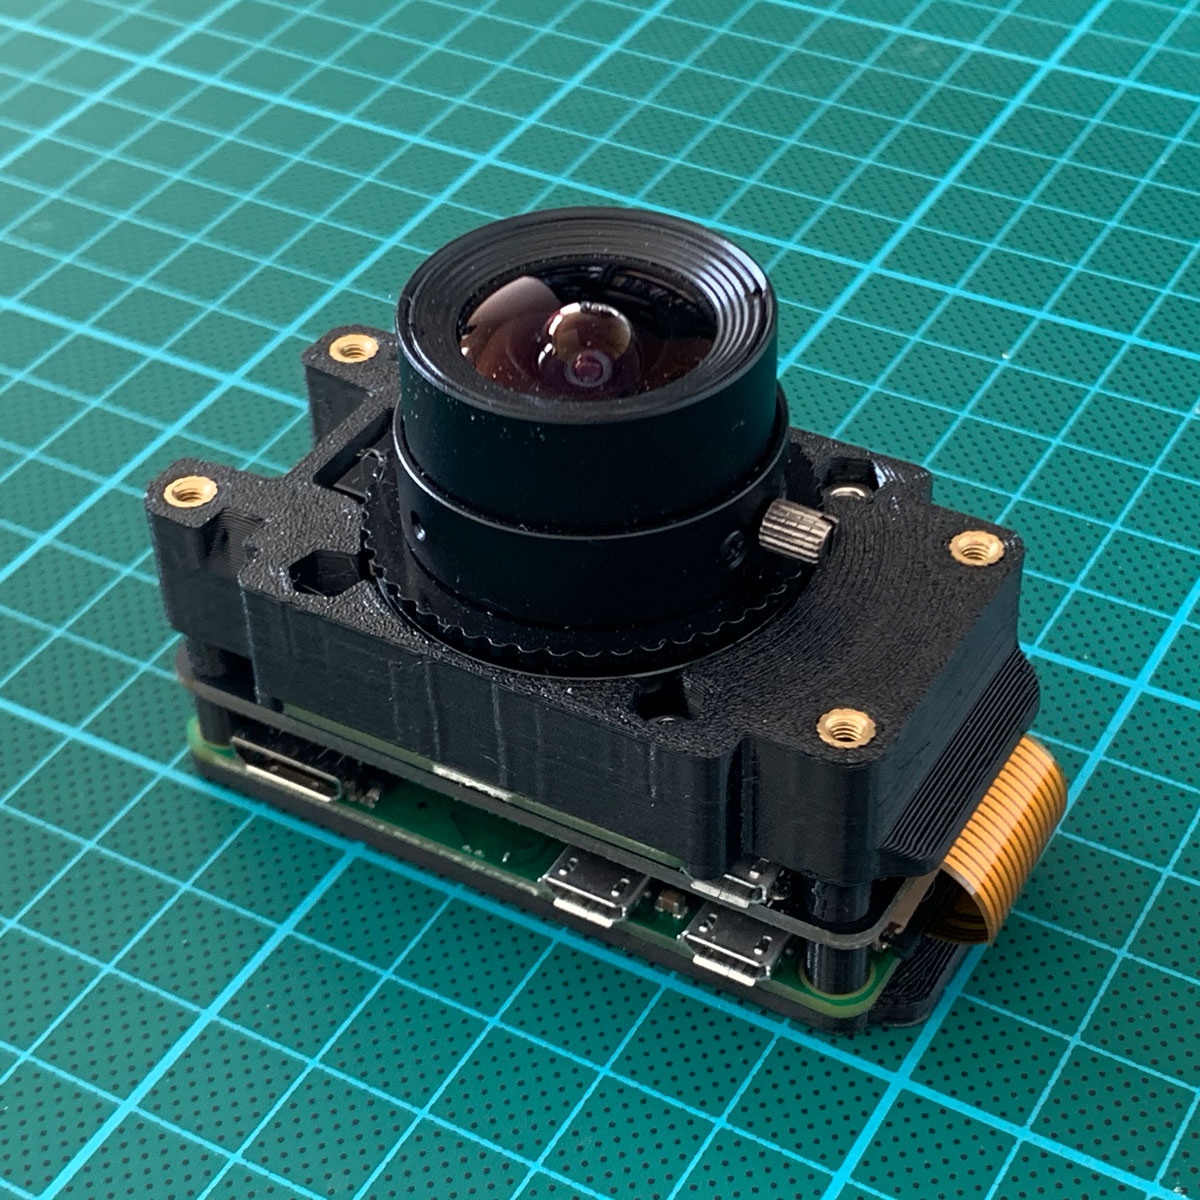 Arecont 4mm lens